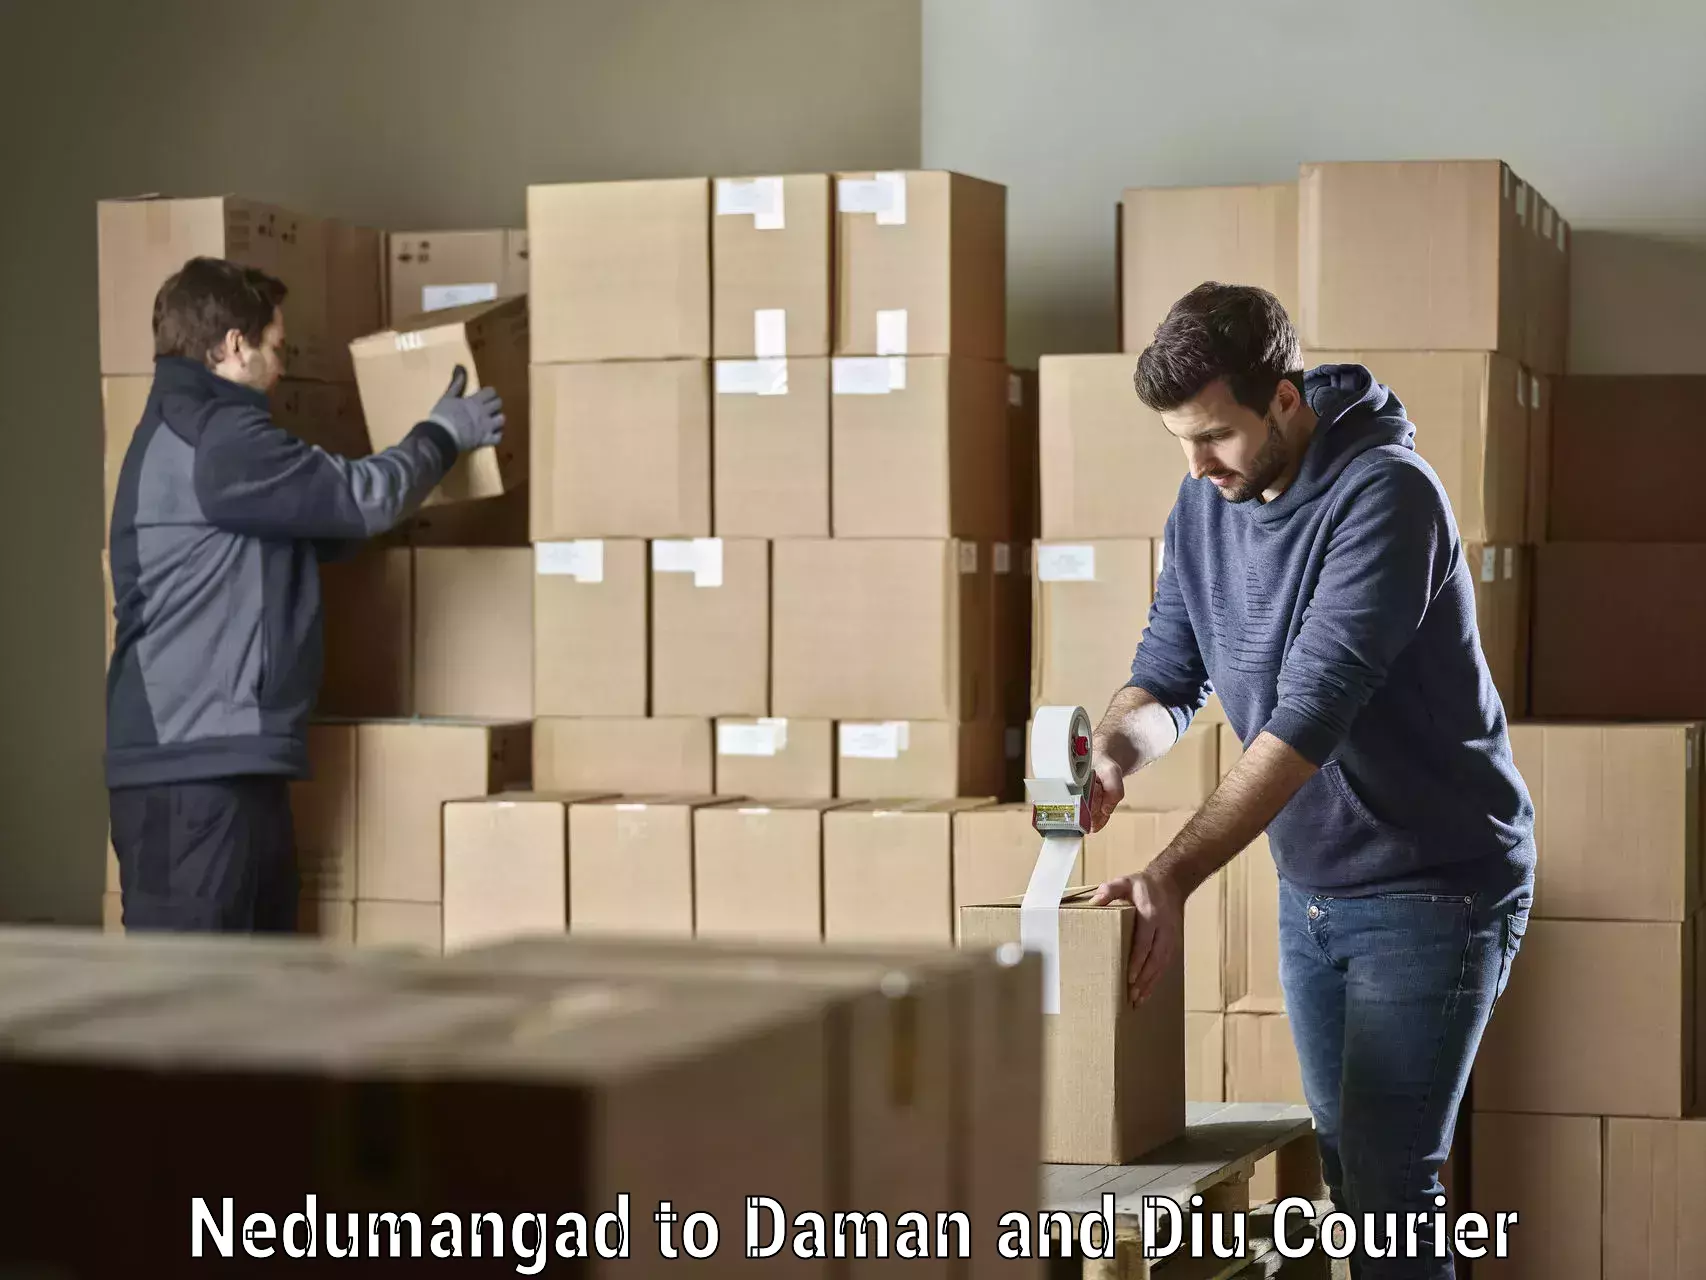 Efficient parcel tracking Nedumangad to Daman and Diu